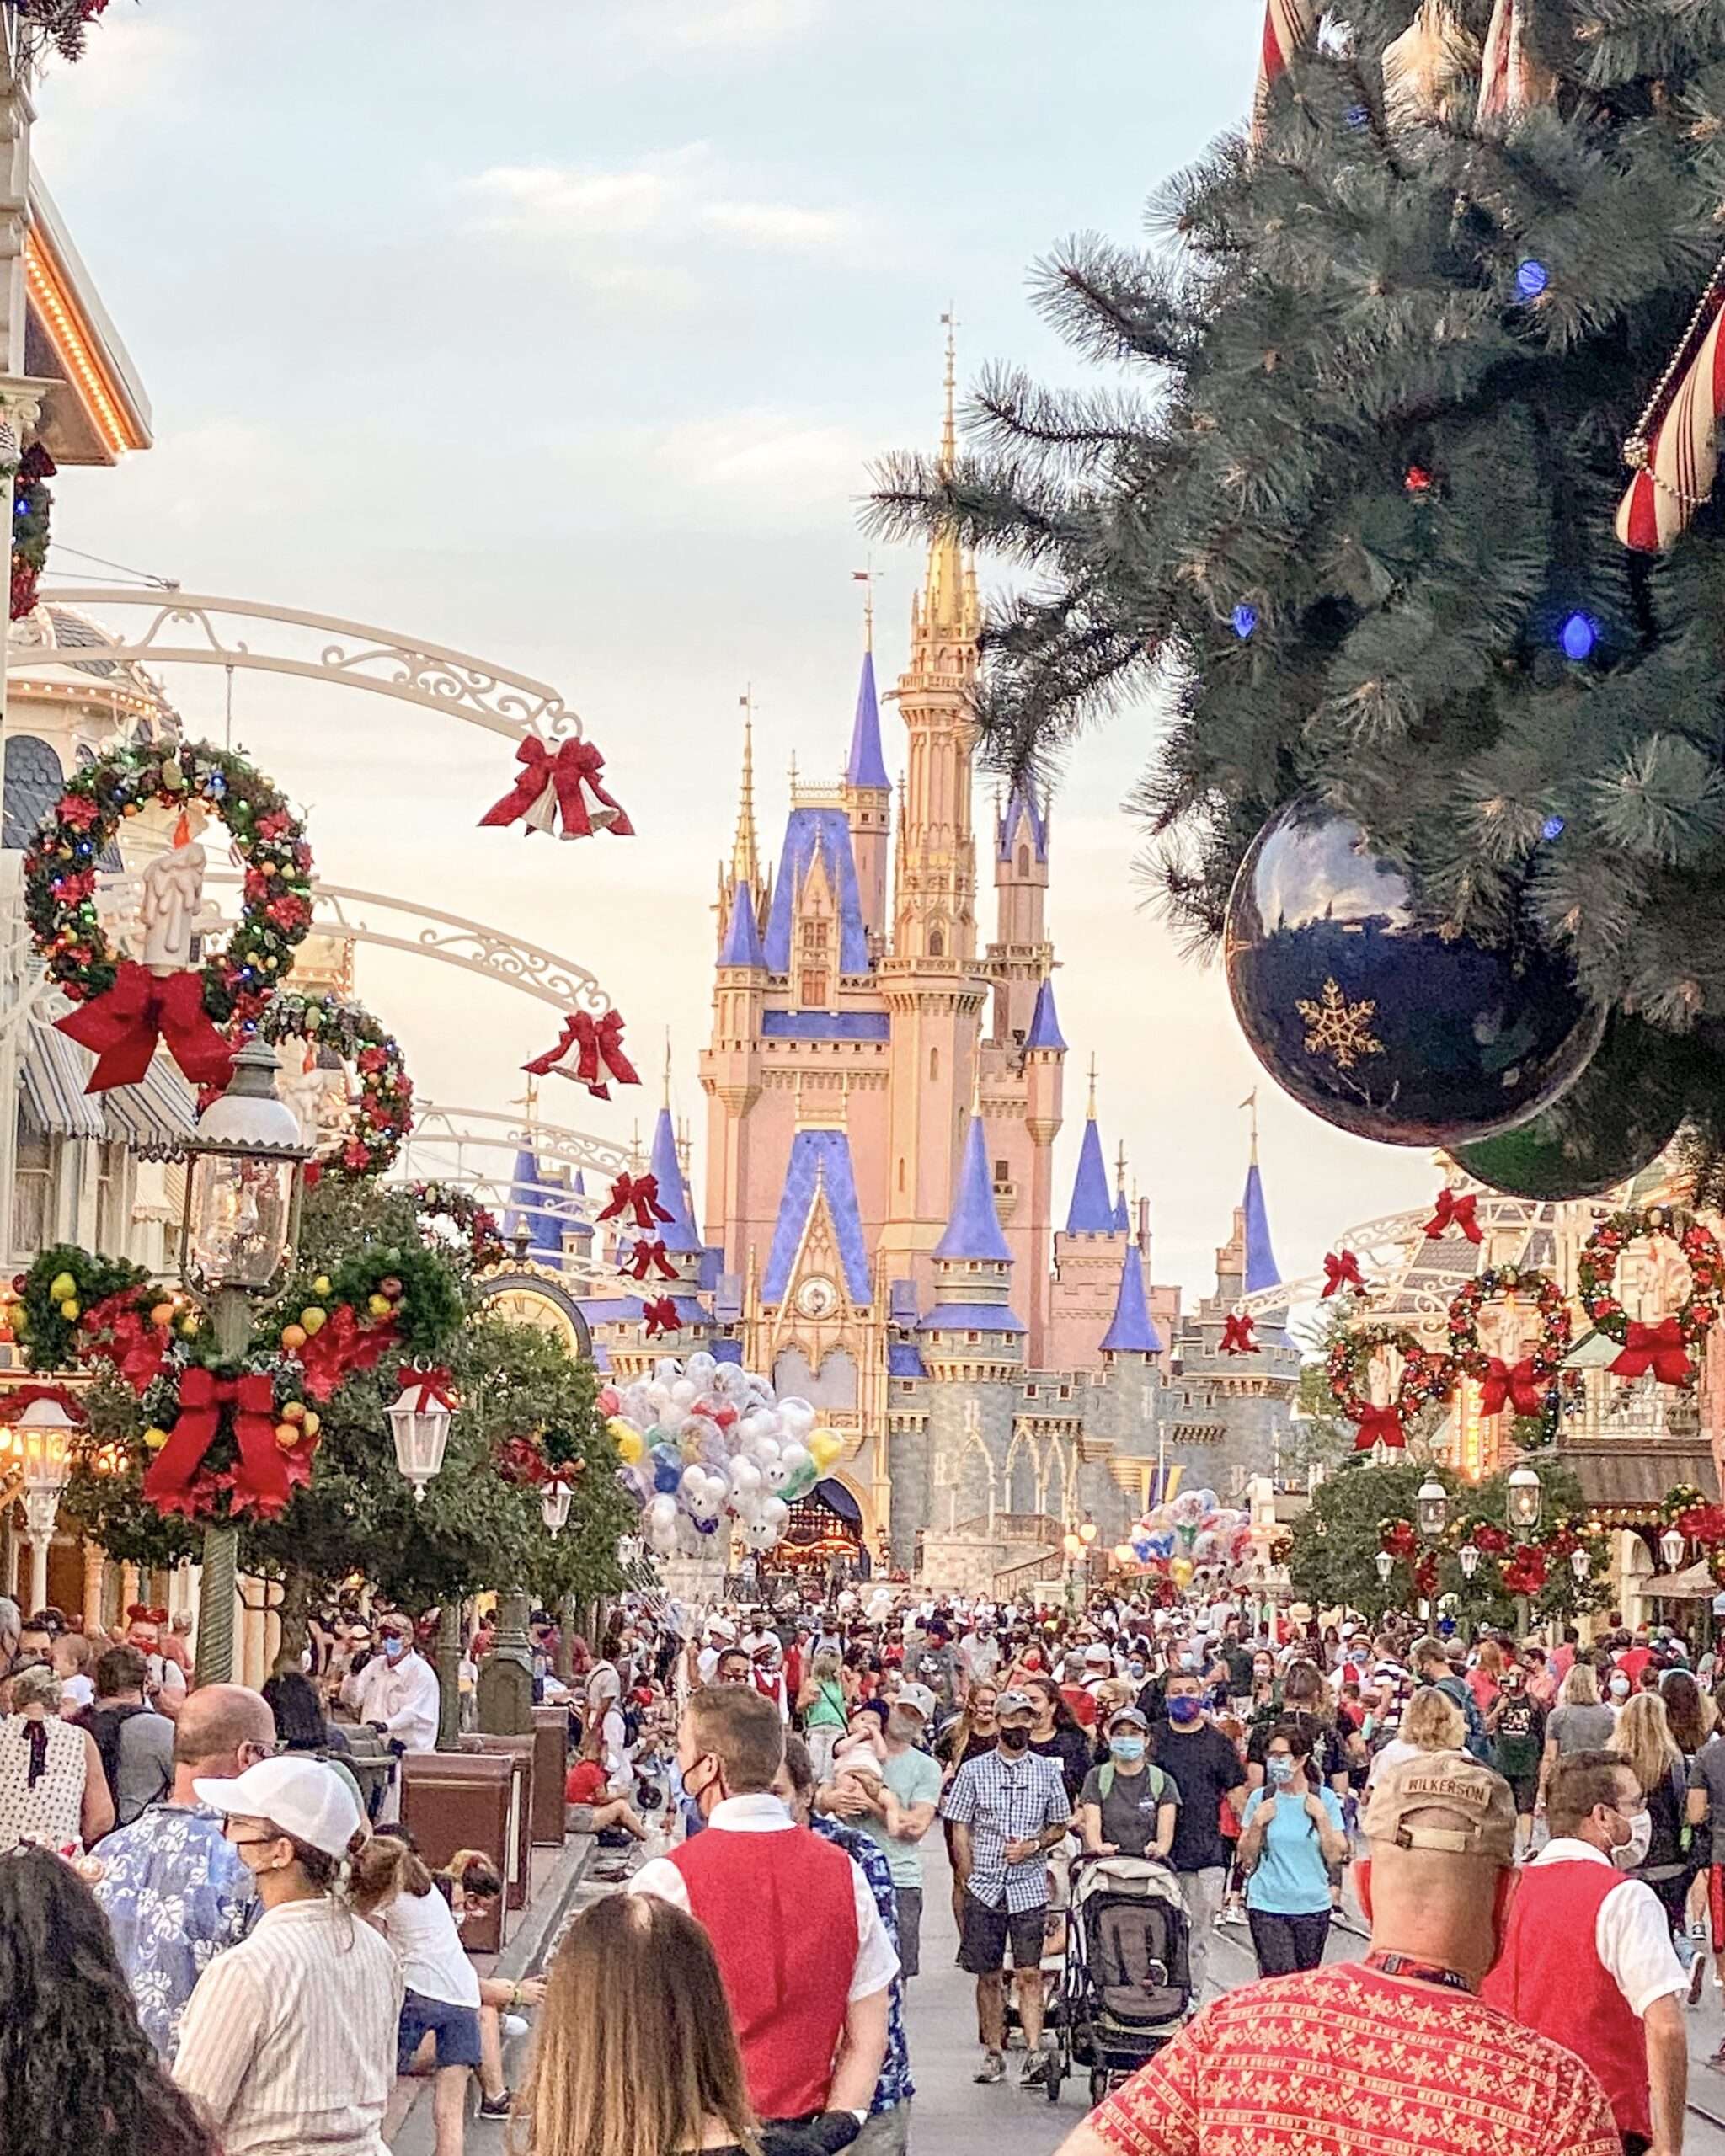 Disney during Christmas time in 2020 - My experience in Walt Disney World during a global pandemic | Magic Kingdom | Toy Story Land in Hollywood Studios | Christmas Decorations, Holiday Treats & Merchandise | Safety Measures in Place | Rides & Wait Times | Mask Requirements | Park Capacity | #Disney #DisneyWorld #MagicKingdom #HollywoodStudios #ToyStoryLand #Christmas #ChristmasDecorations #ChristmasinDisney